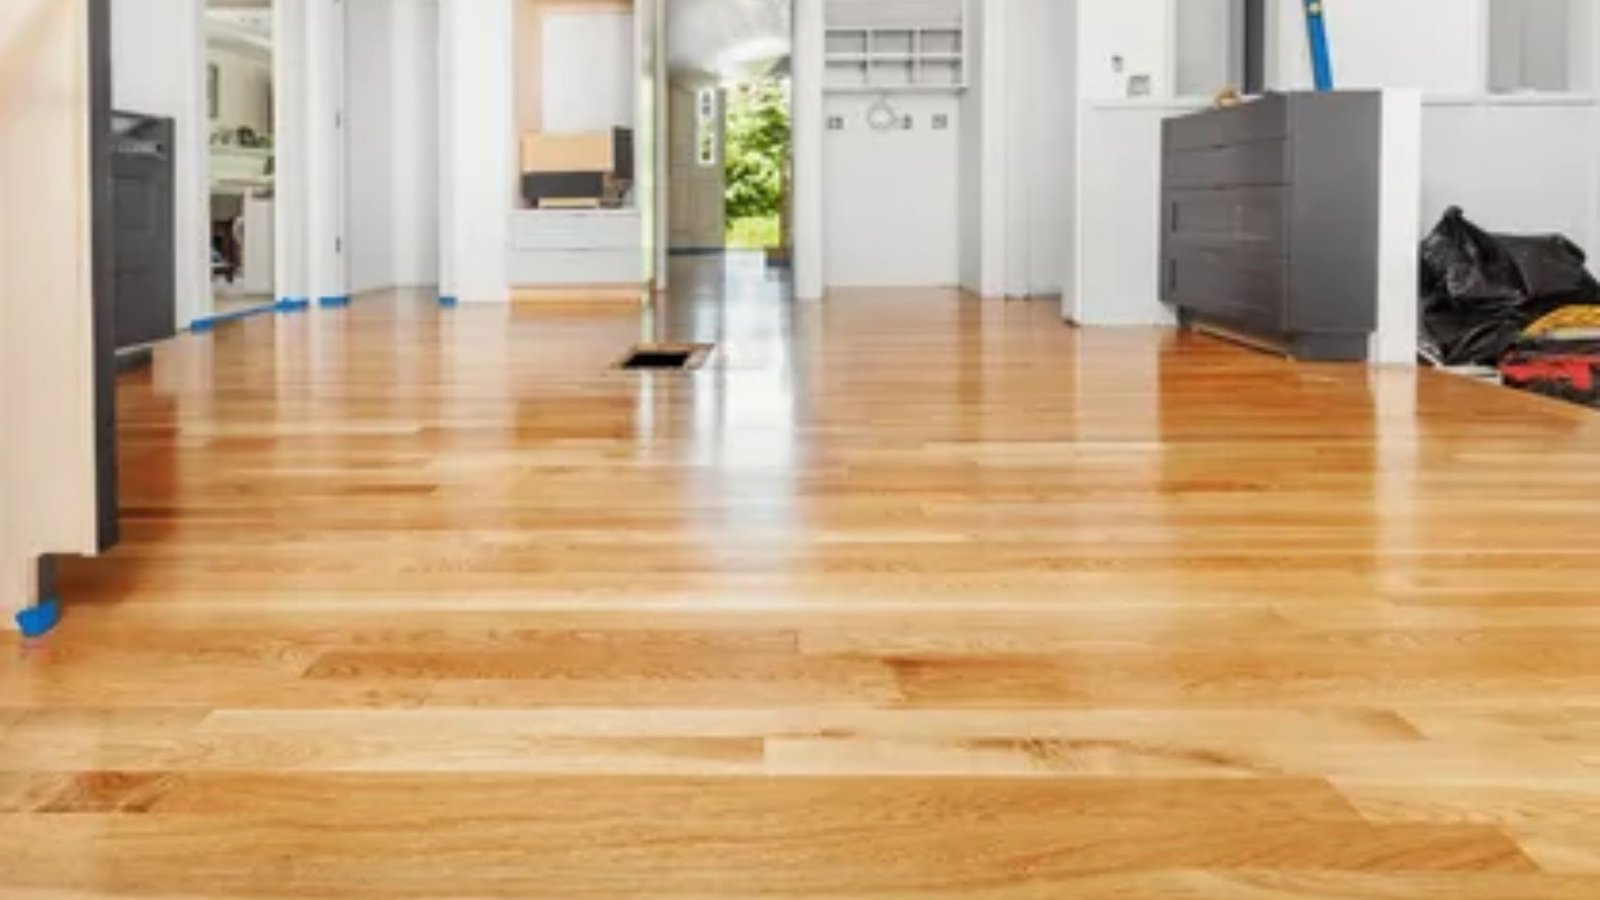 Melbourne’s Leading Dust-Free Floor Sanding and Polishing Experts